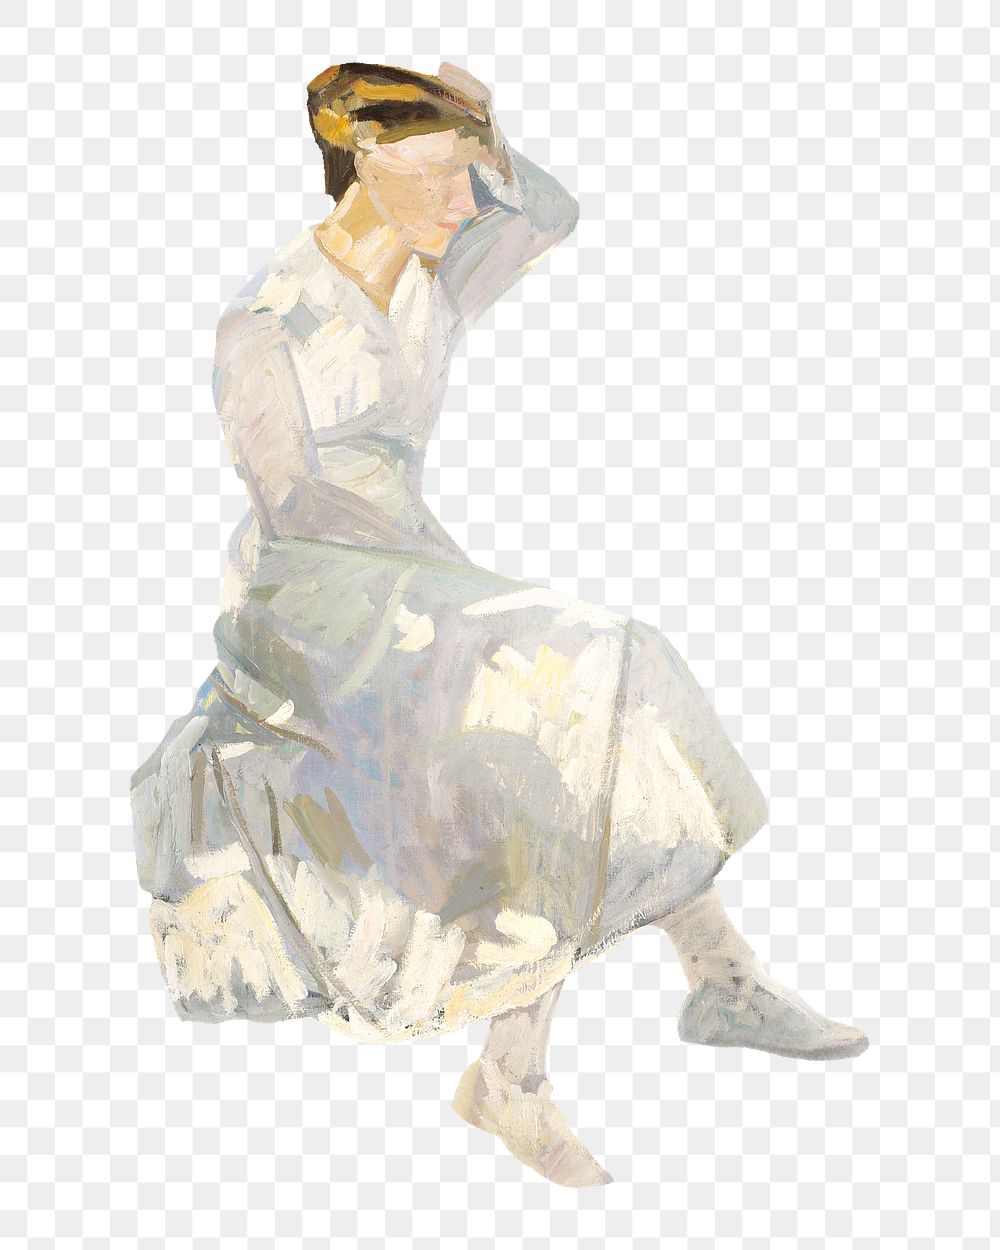 Victorian woman png, vintage illustration by Edvard Weie, transparent background. Remixed by rawpixel.